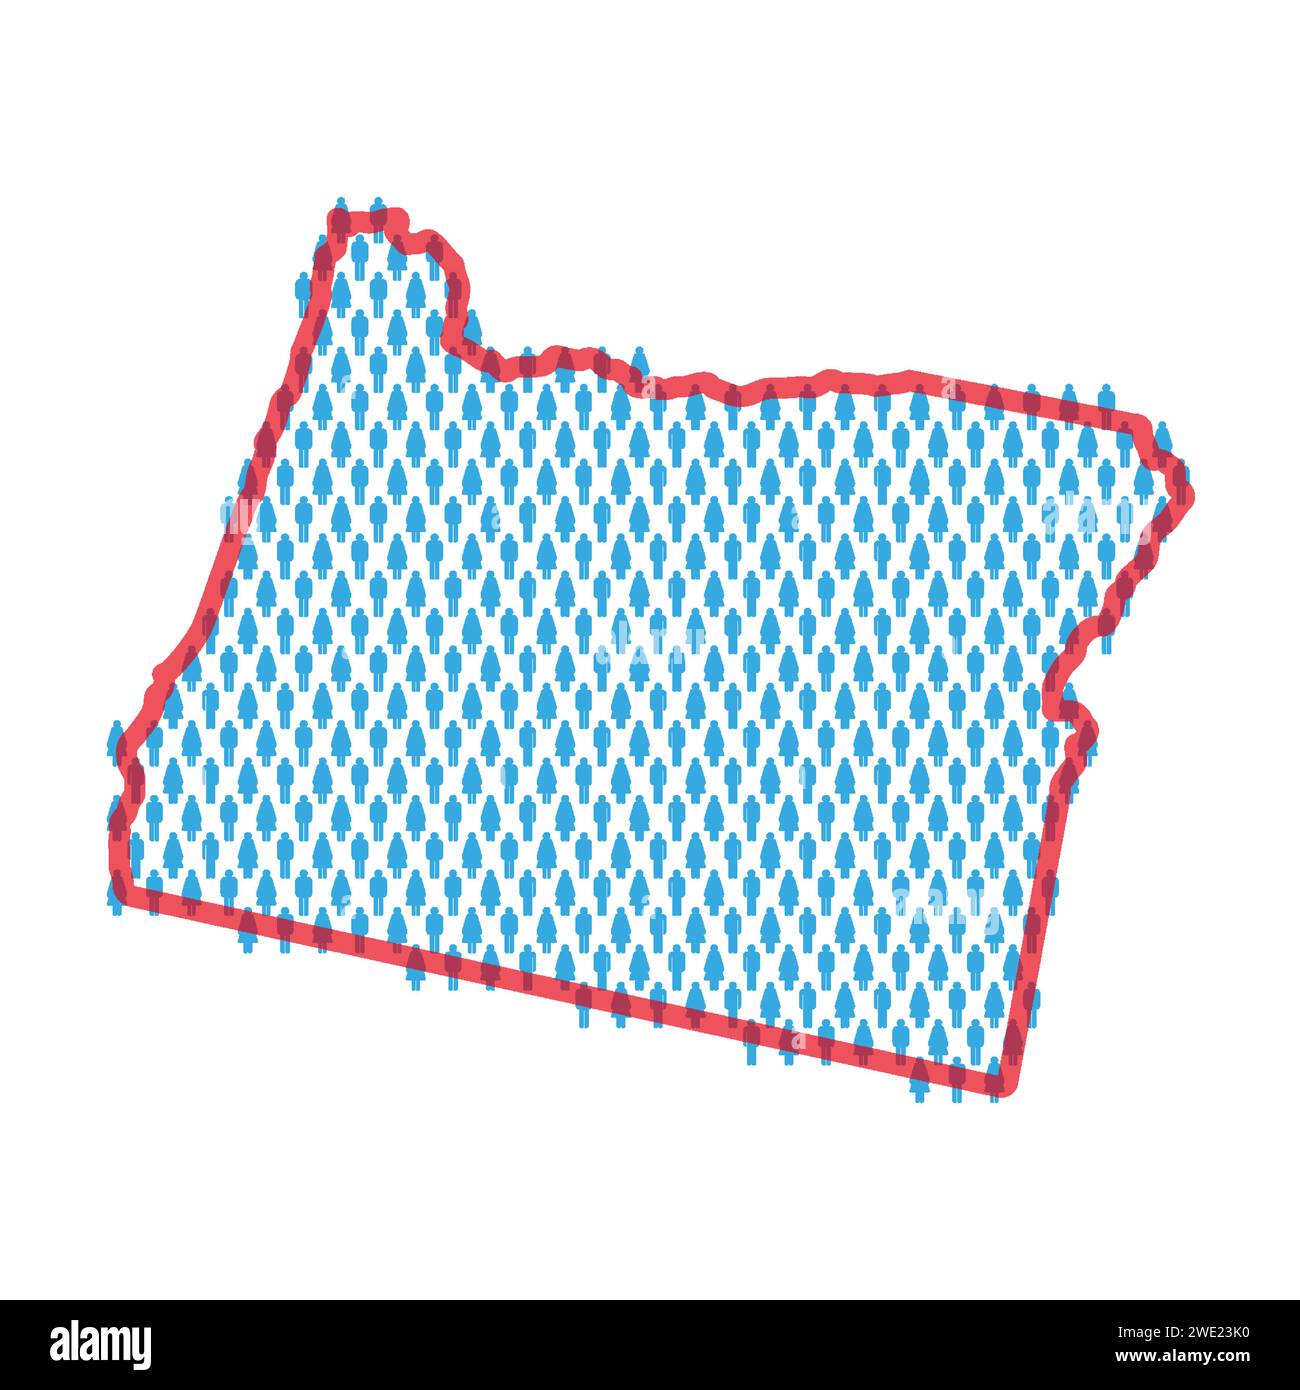 Oregon population map. Stick figures people map with bold red translucent state border. Pattern of men and women icons. Isolated vector illustration. Stock Vector